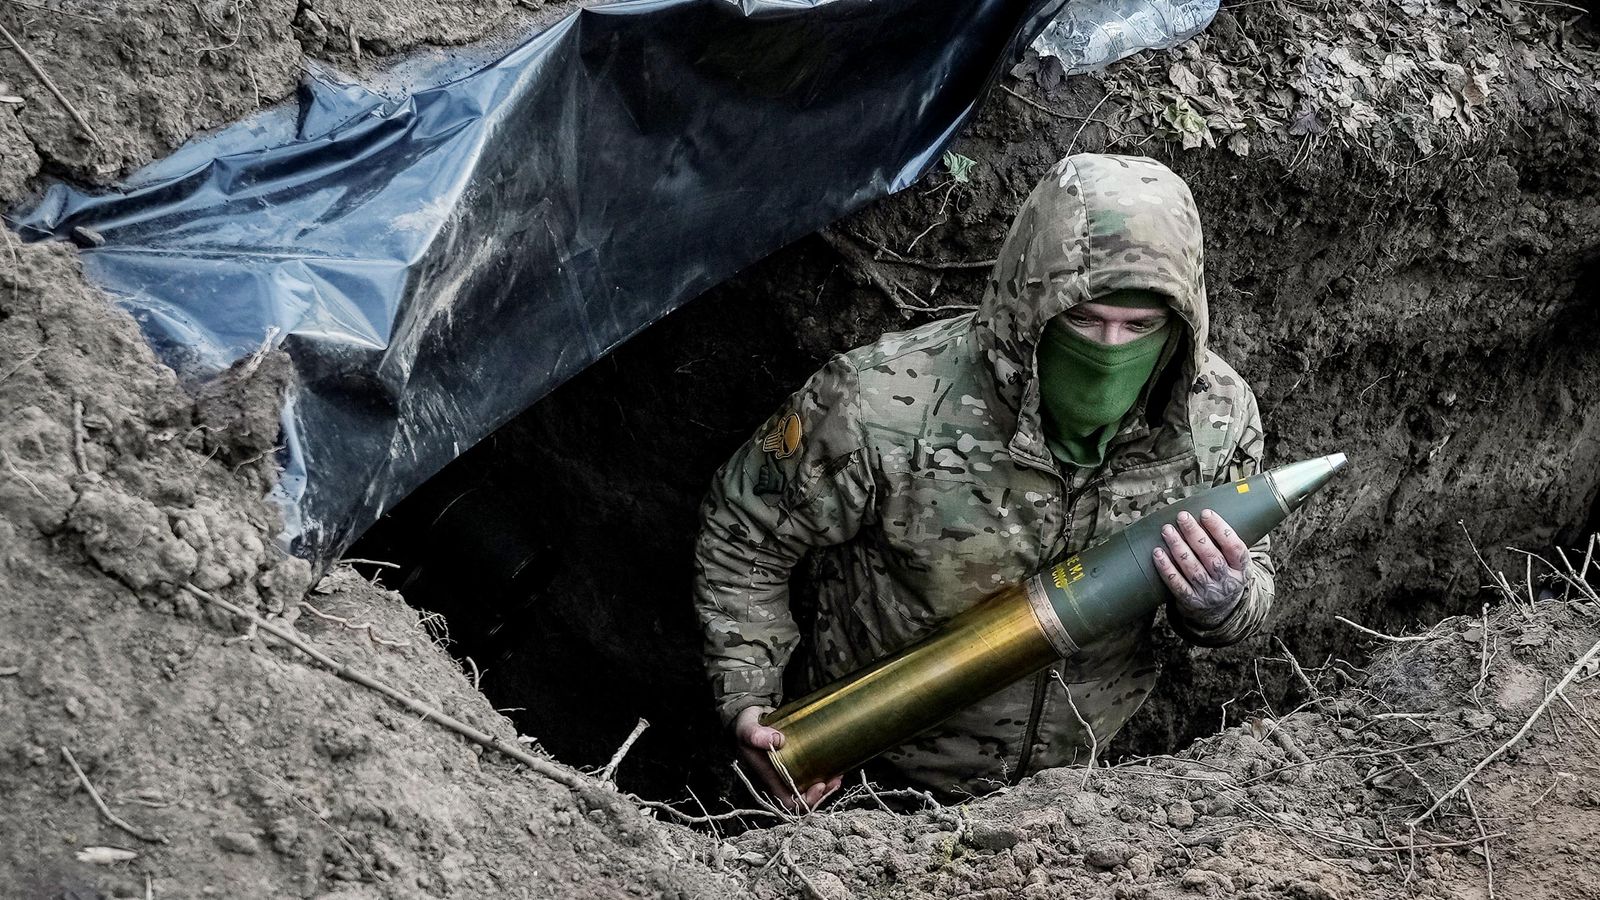 Russia using chemical choking agents against Ukrianian troops, US claims